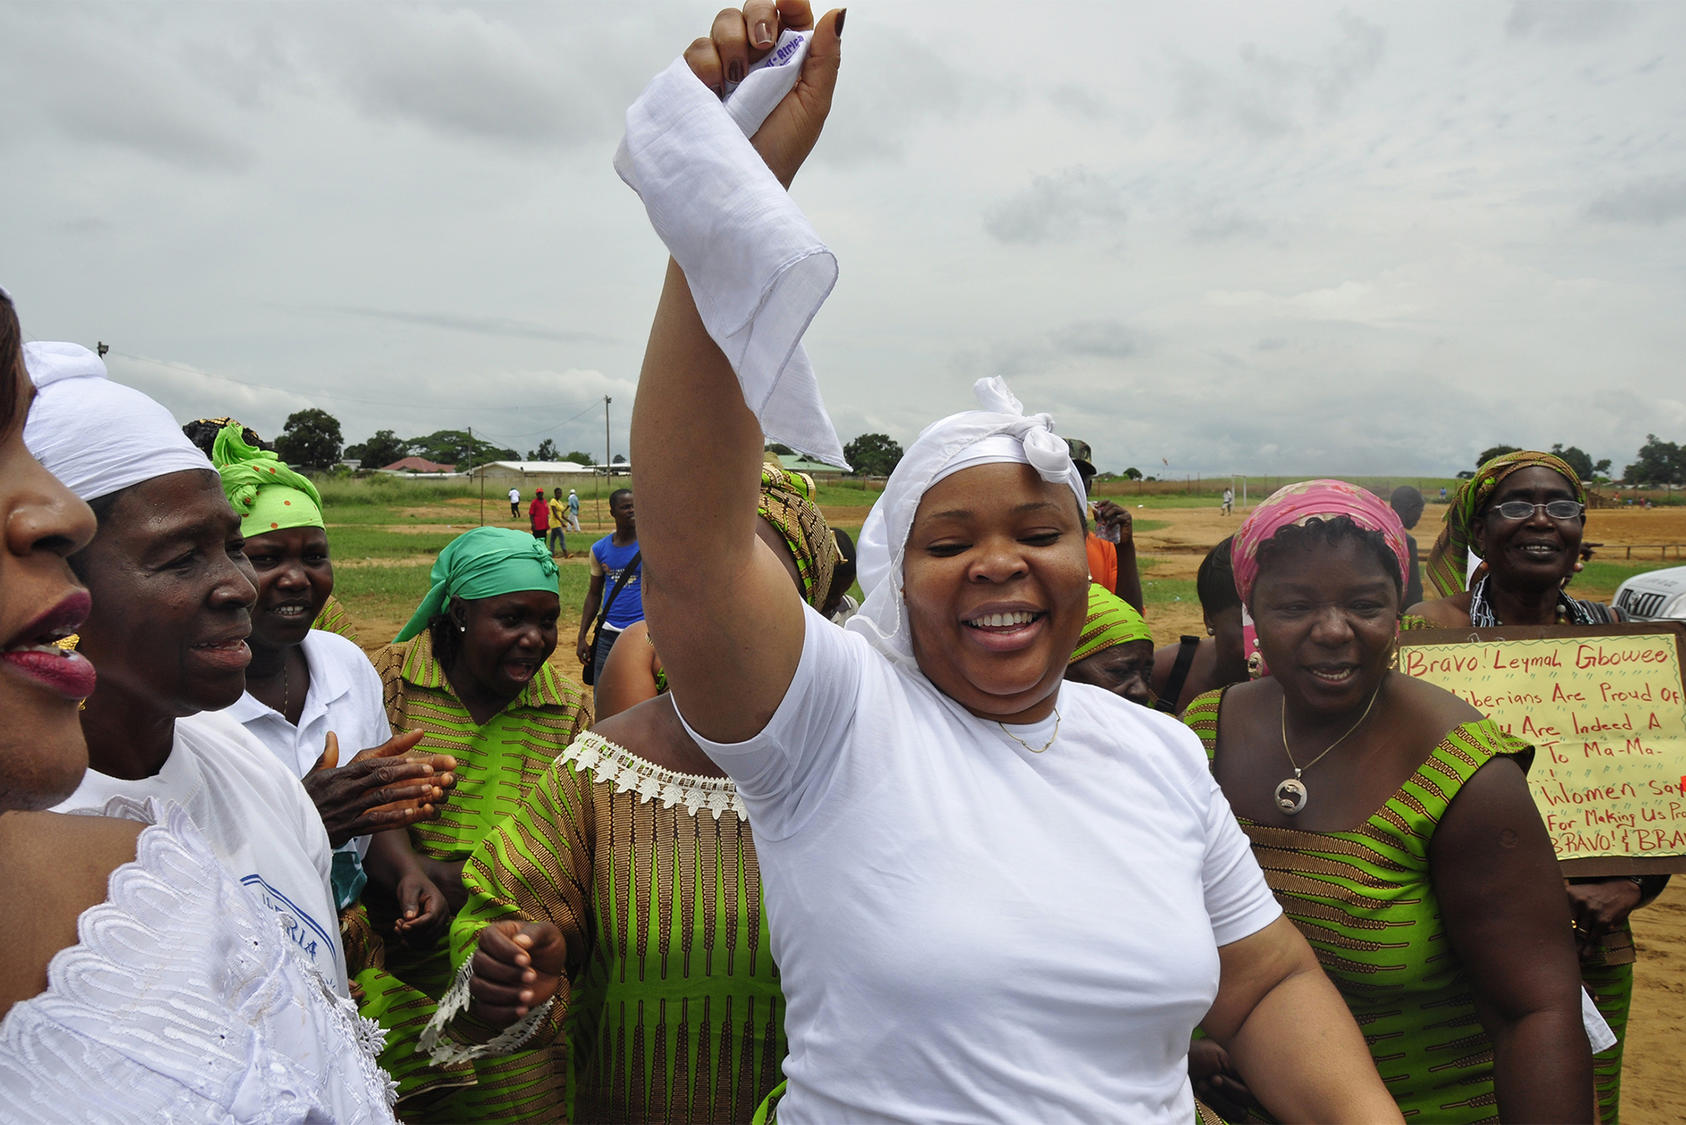 Leymah Gbowee, center, reacts to winning the Nobel Peace Prize in Monrovia, Liberia, on October 9, 2011. Gbowee was honored for organizing Christian and Muslim women to bring peace to Liberia and women’s participation in elections. (Photo by Abbas Dulleh/AP)